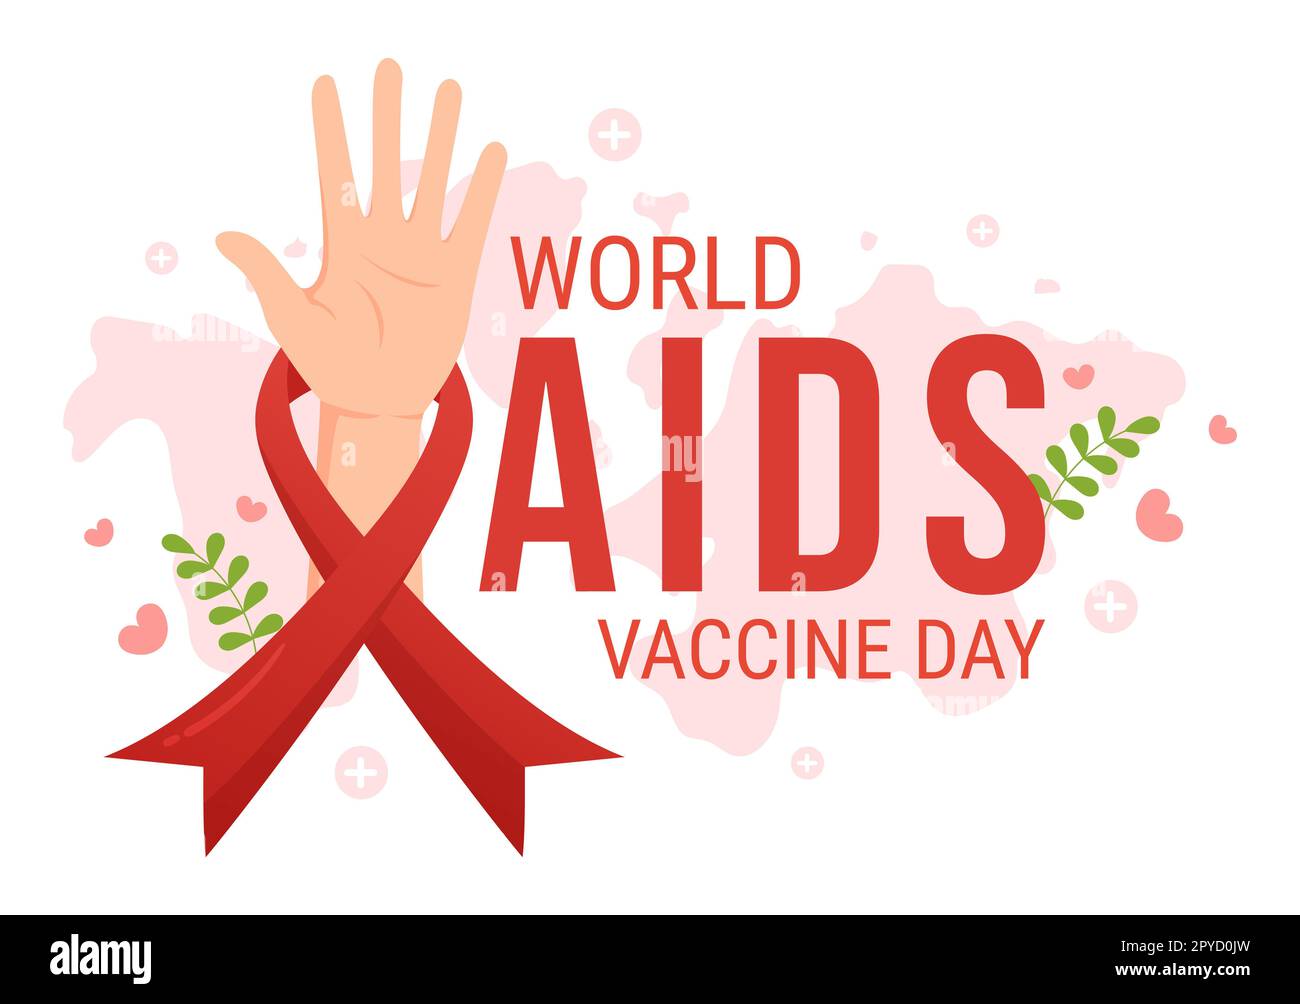 World Aids Vaccine Day Illustration to Prevention and Awareness Health Care in Flat Cartoon Hand Drawn for Web Banner or Landing Page Templates Stock Photo